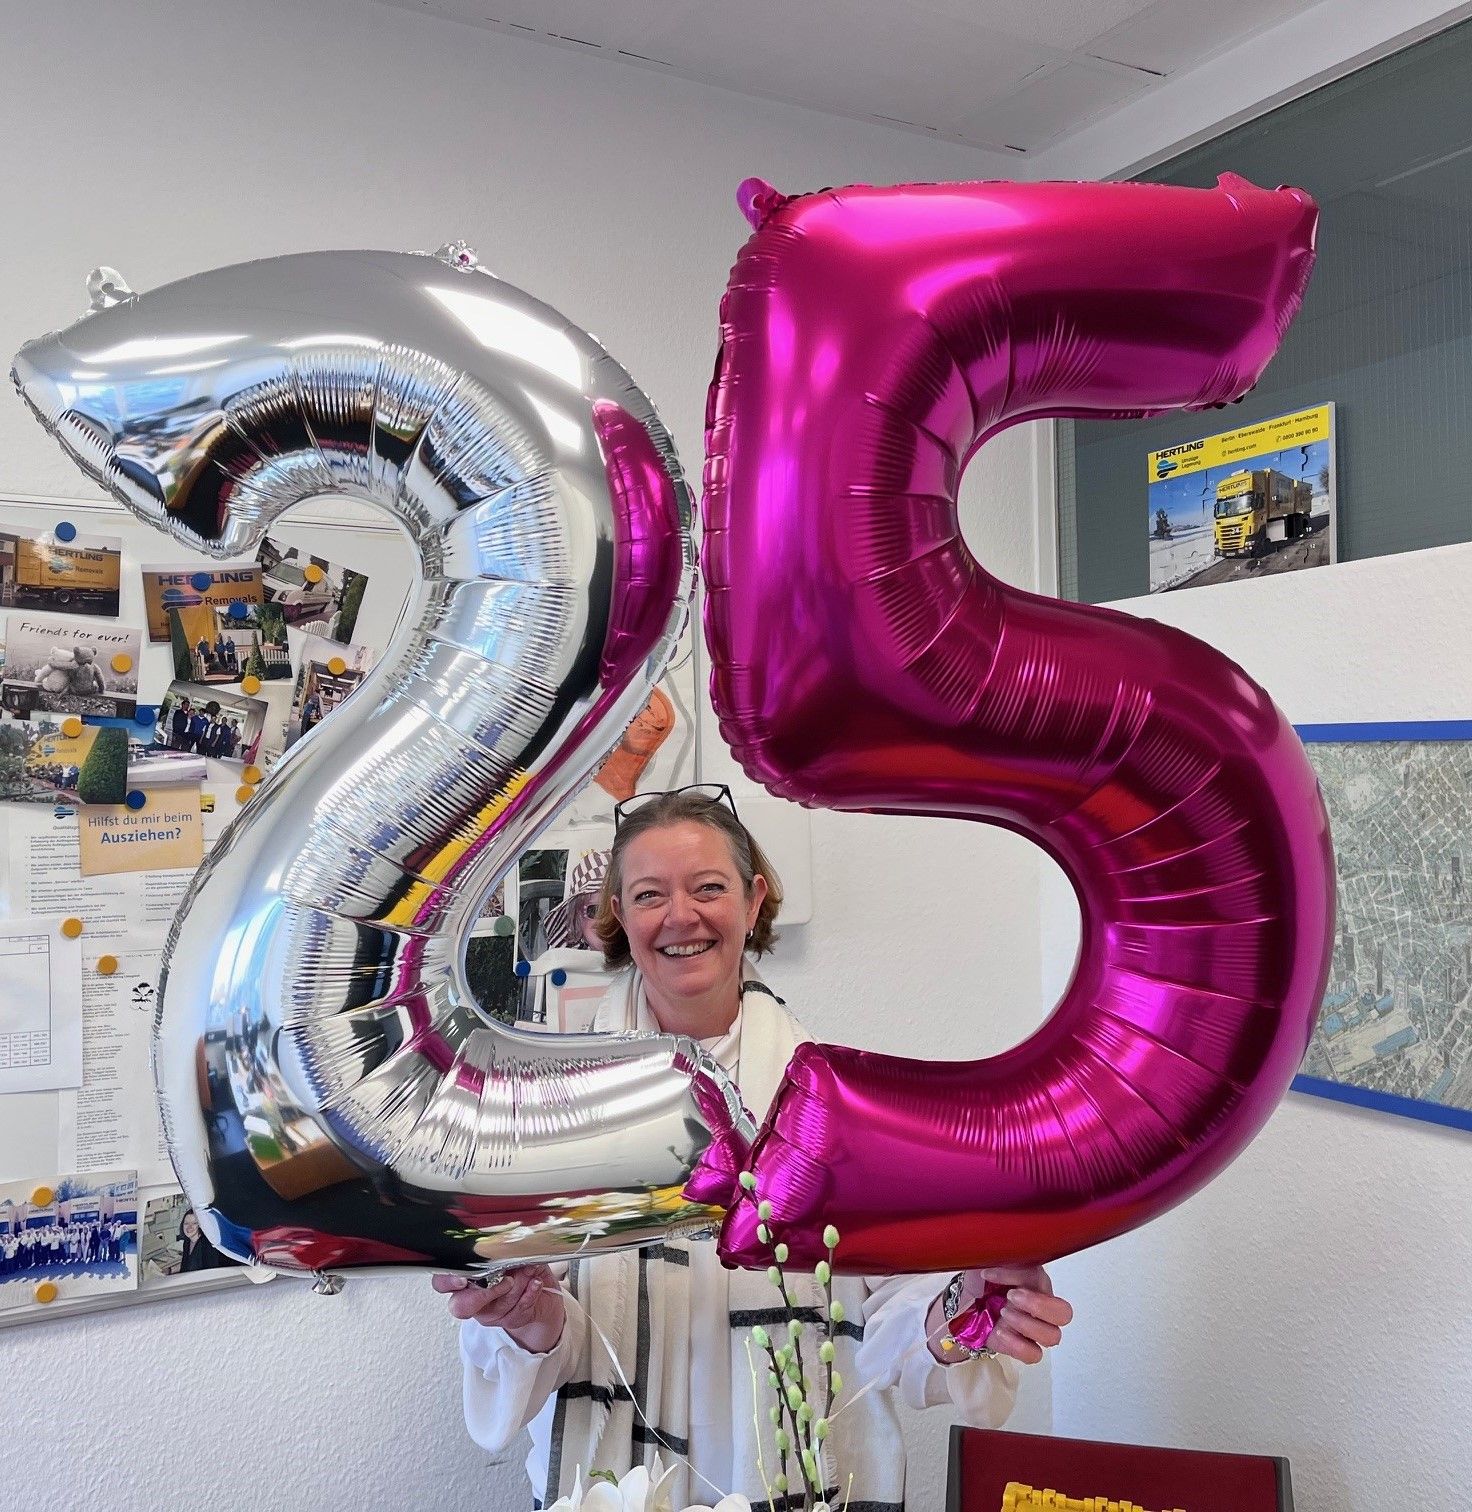 Ms. Schorn from the Frankfurter Hertling team with anniversary baloons